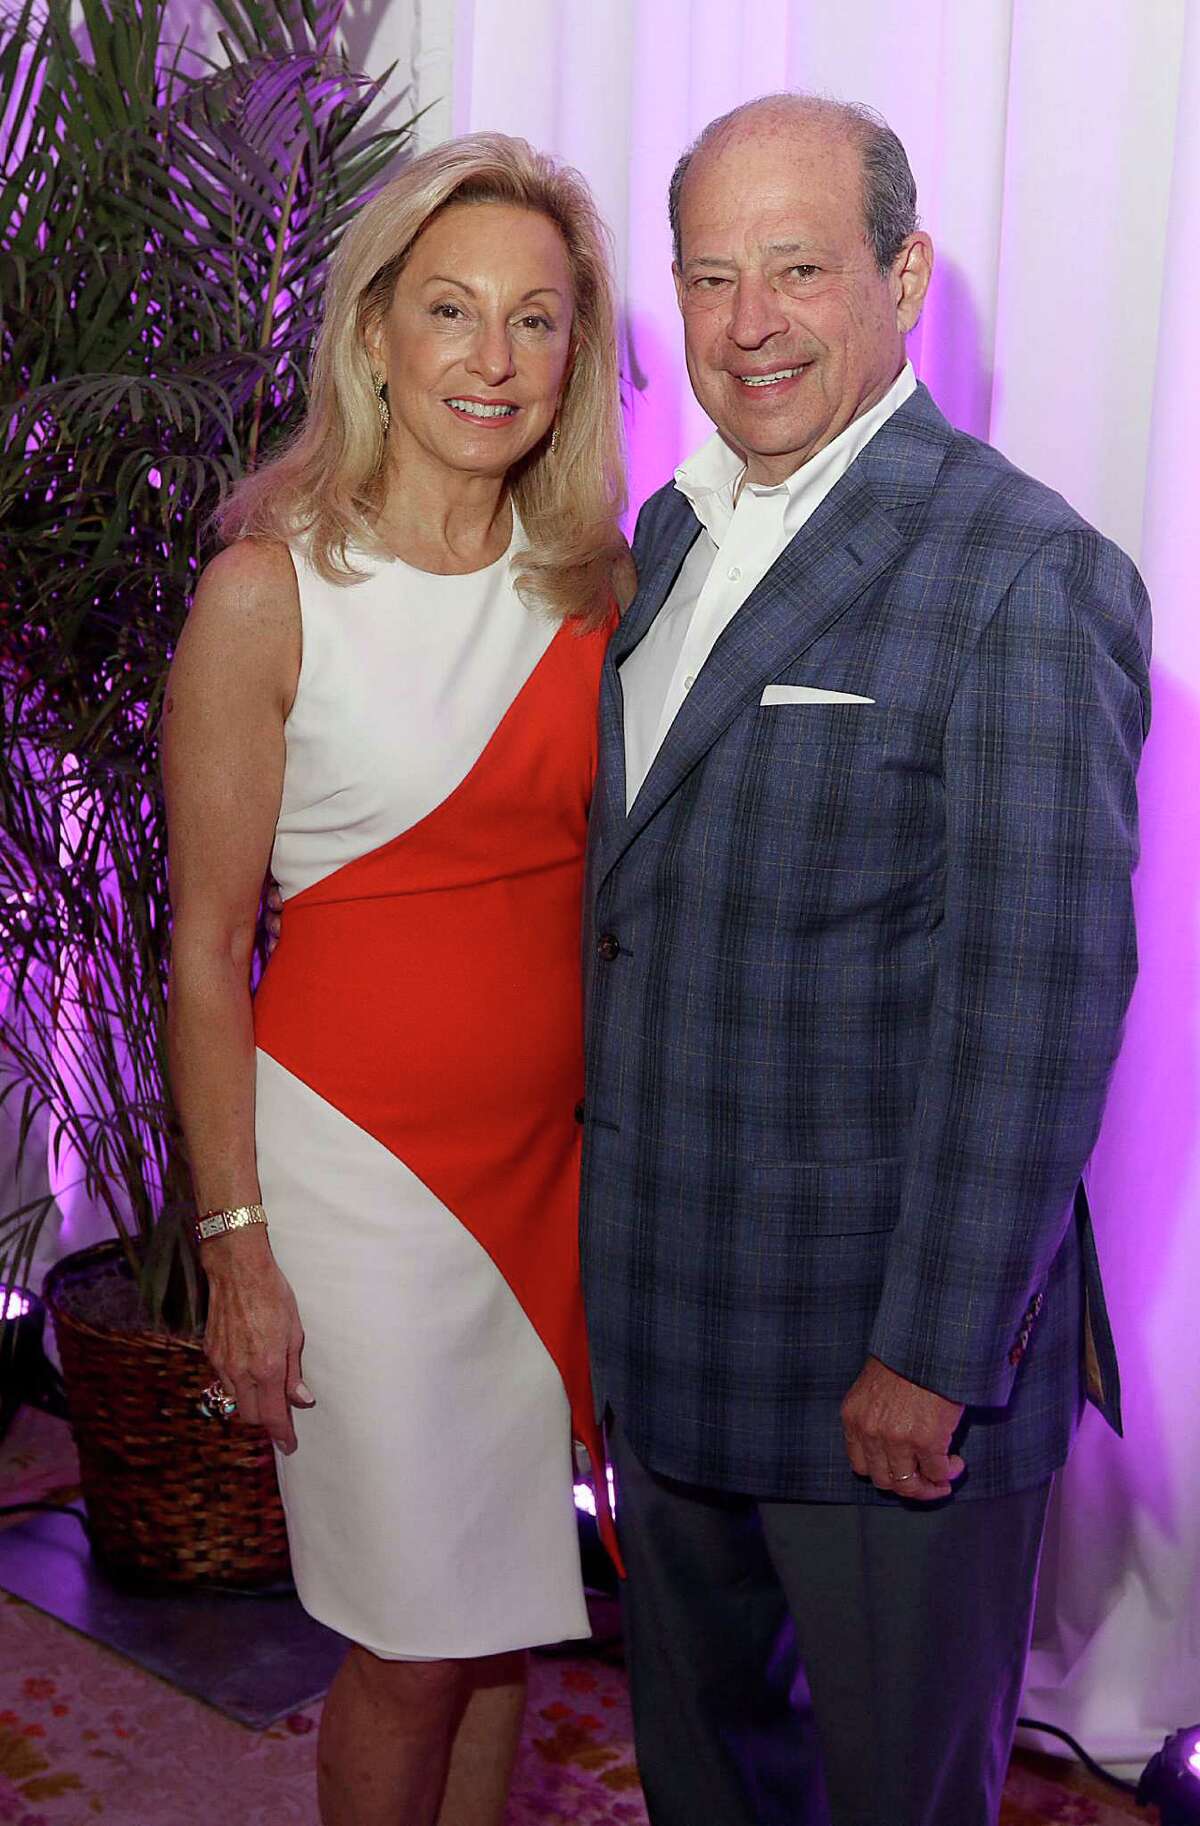 Were you Seen at The Foods of Anne Burrell, a benefit for the Thoroughbred Retirement Foundation, held at the Canfield Casino in Saratoga Springs on Sunday, August 9, 2015?